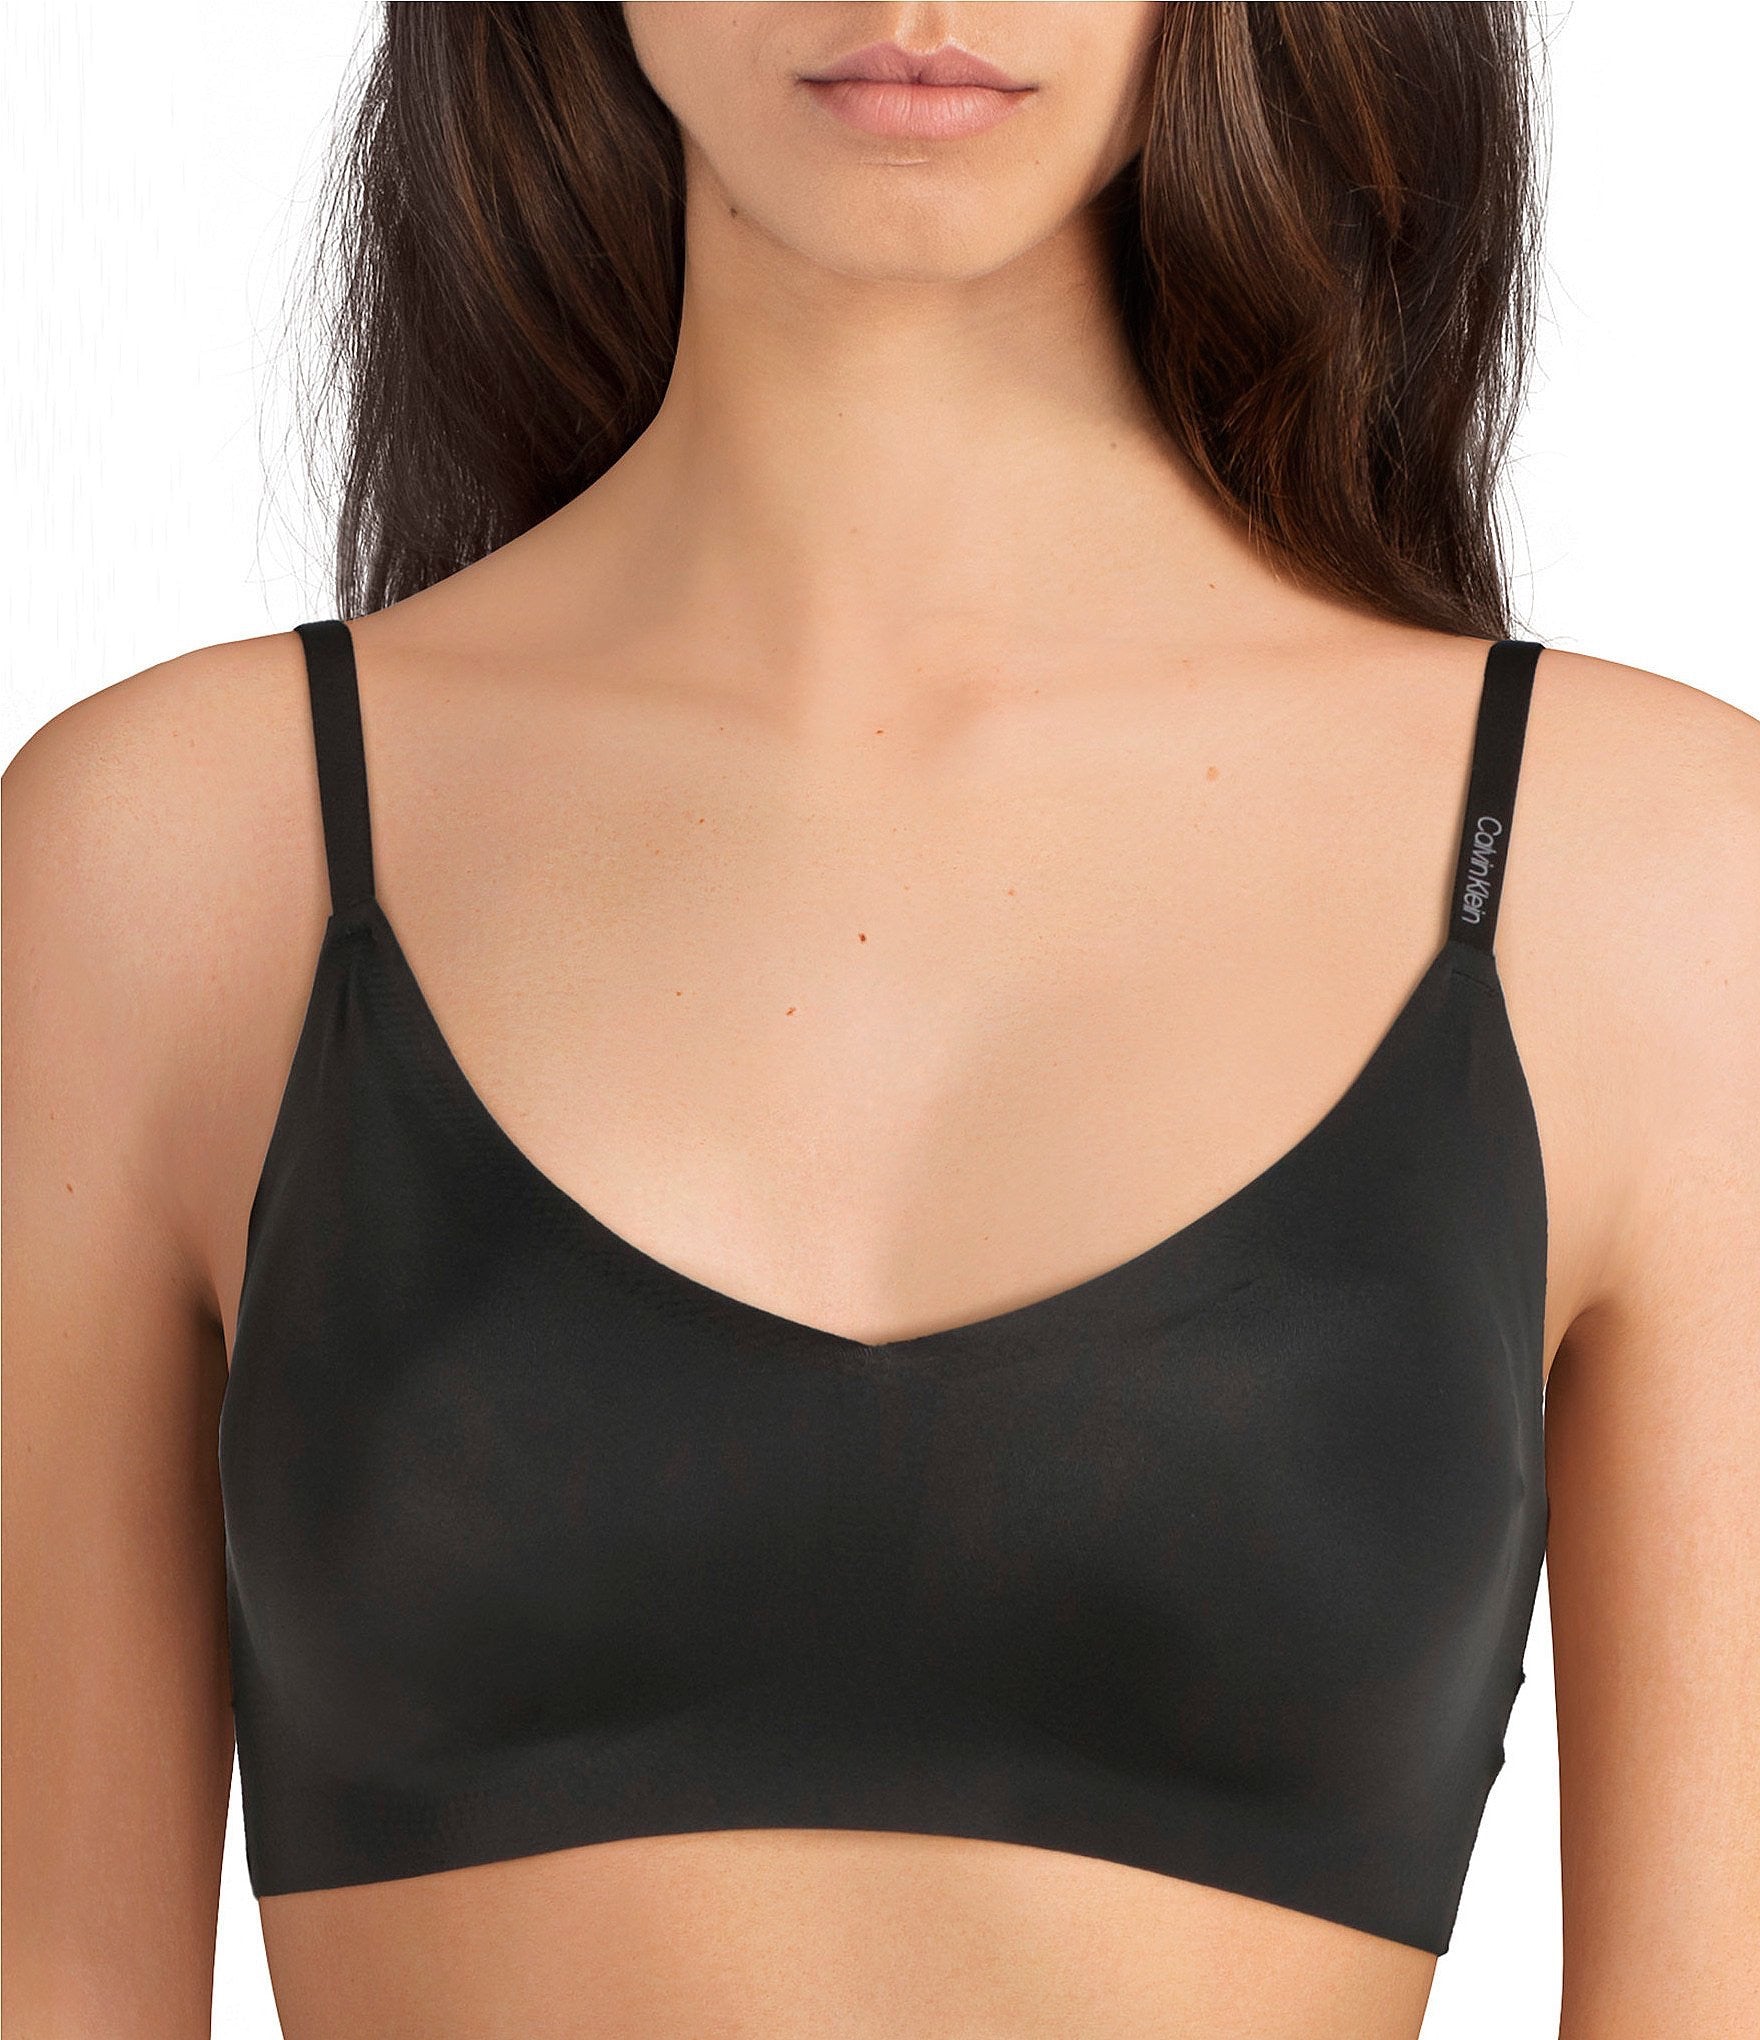 Shoppers Say This On-Sale Calvin Klein Bra Is 'Impossibly Soft